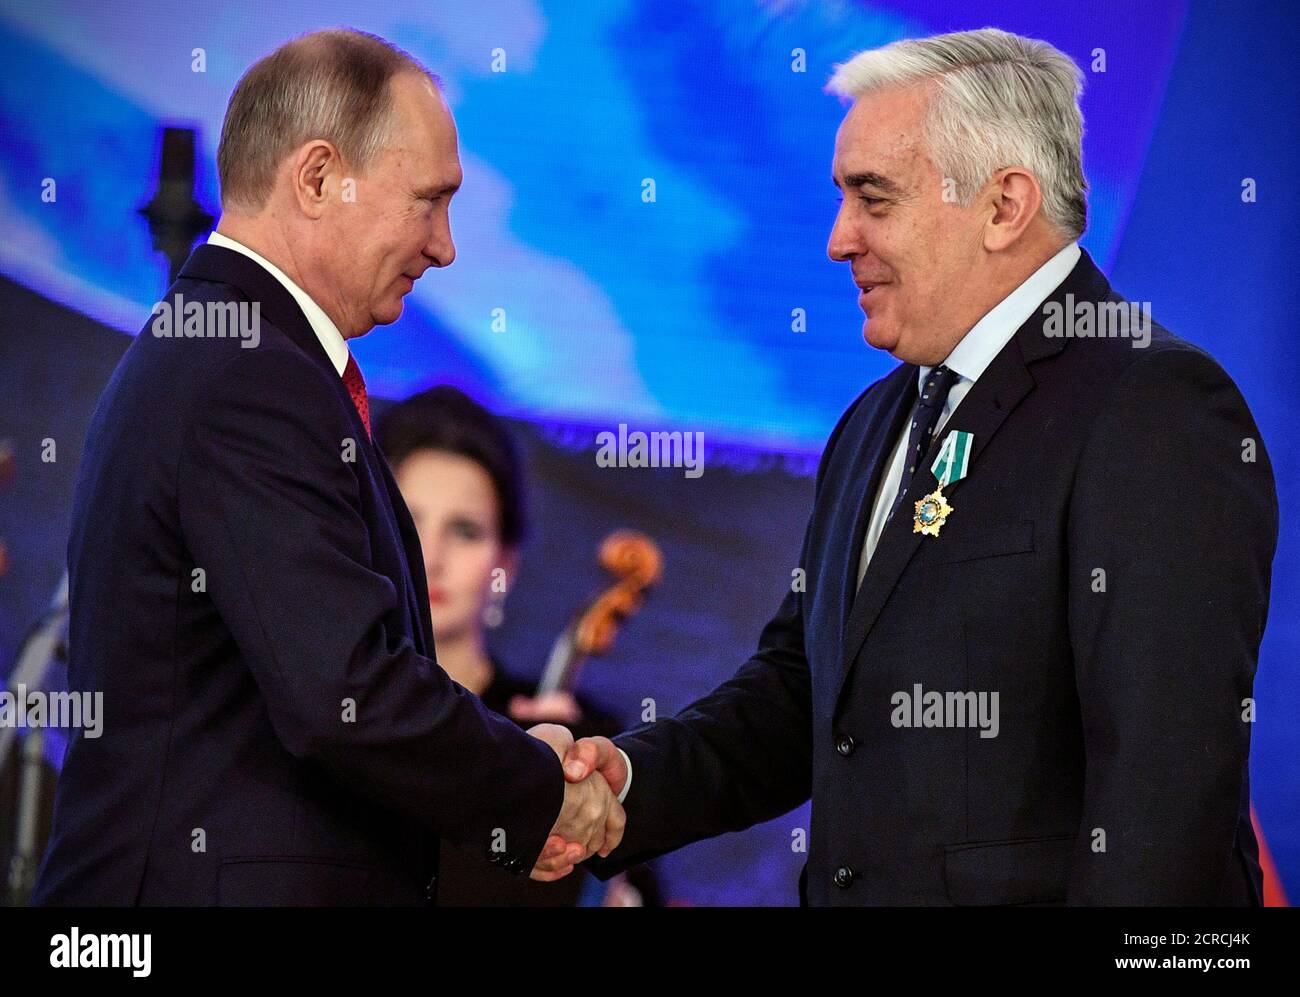 Russia's President Vladimir Putin decorates Spain's Rafael Guzman Tirado, Professor of Greek Philology and Slavic Philology of the University of Granada with the People's Friendship order during a reception on the National Unity Day at the Kremlin in Moscow, Russia November 4, 2017. REUTERS/Alexander Nemenov/Pool Stock Photo